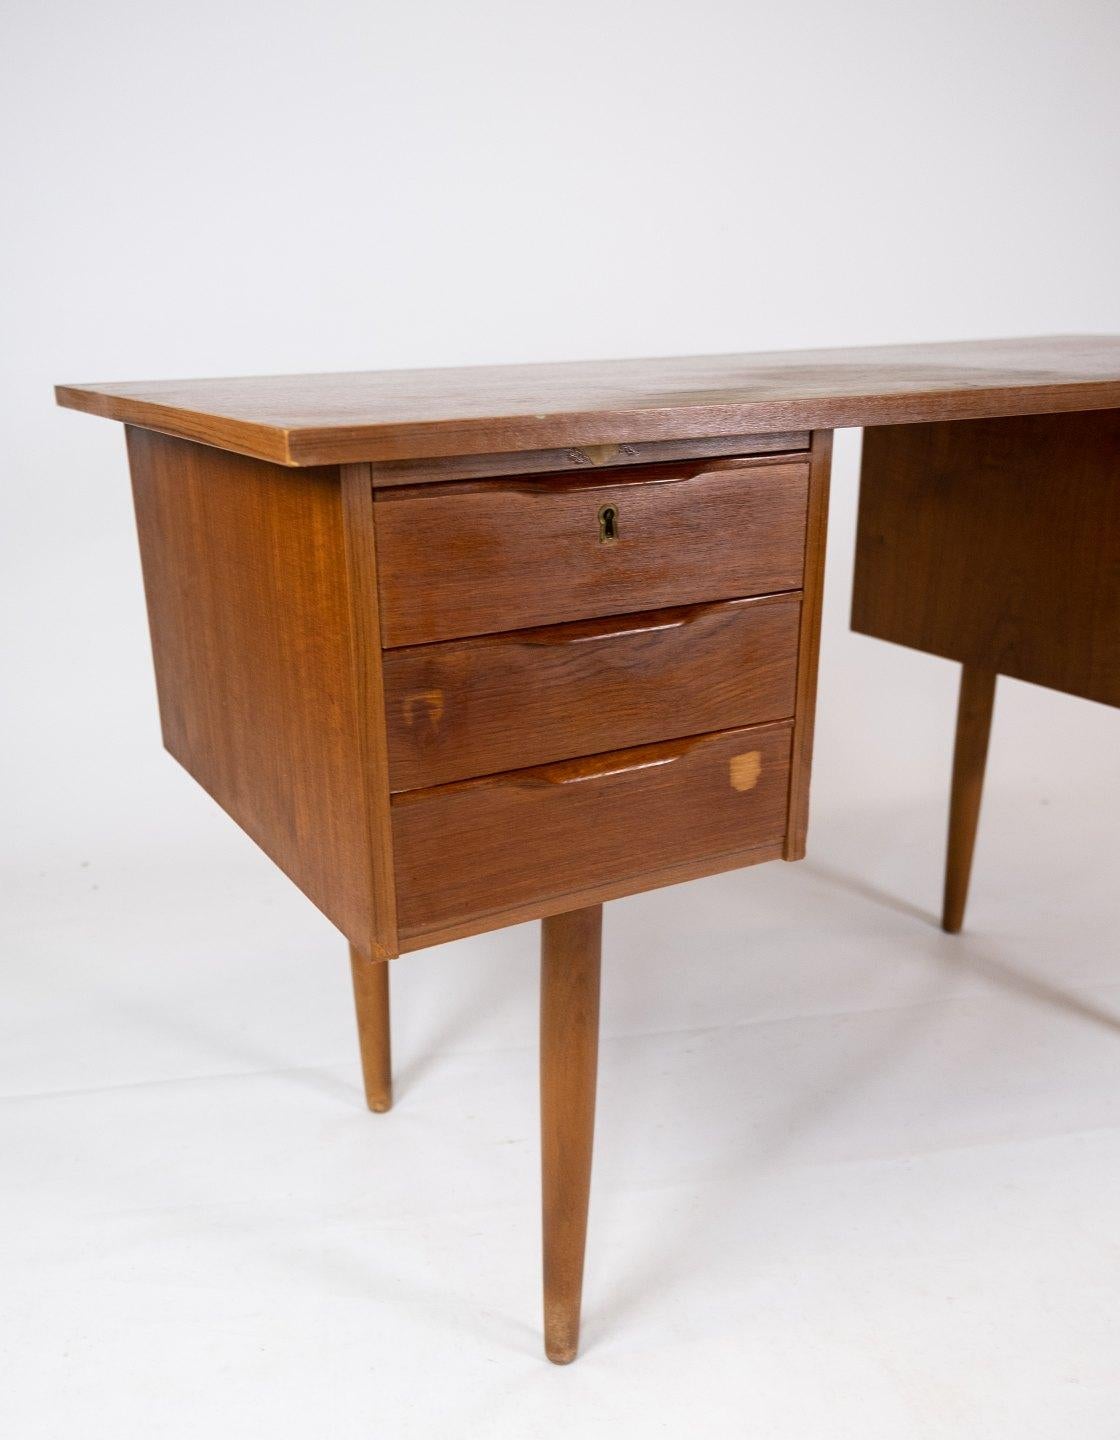 This desk is a beautiful example of Danish design from the 1960s, made of teak wood, which gives it a natural and timeless look. The beautiful golden color and unique wood pattern add character and warmth to any room. With its simple and elegant